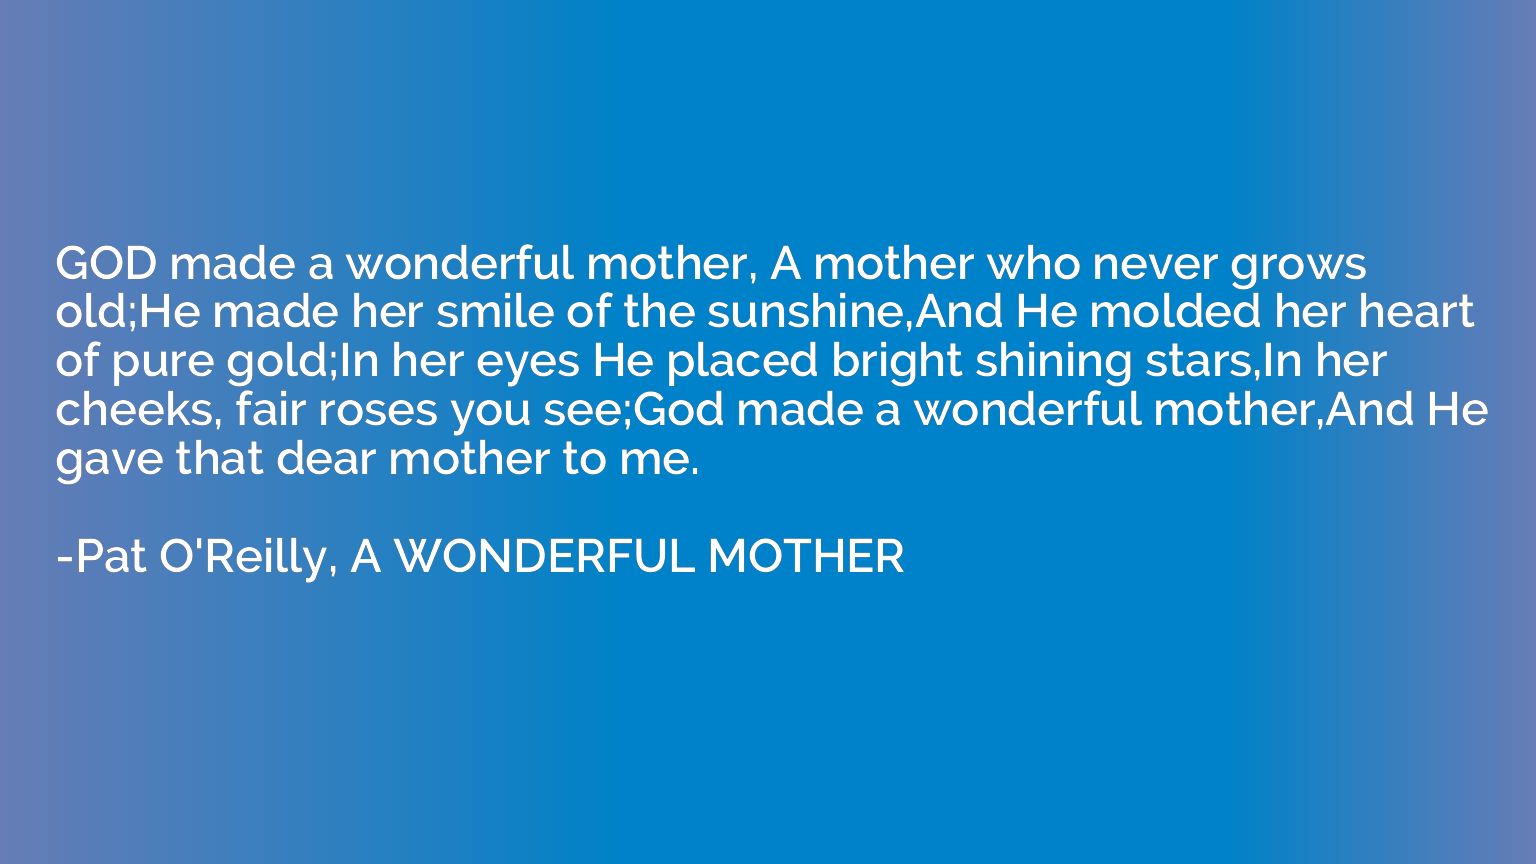 GOD made a wonderful mother, A mother who never grows old;He